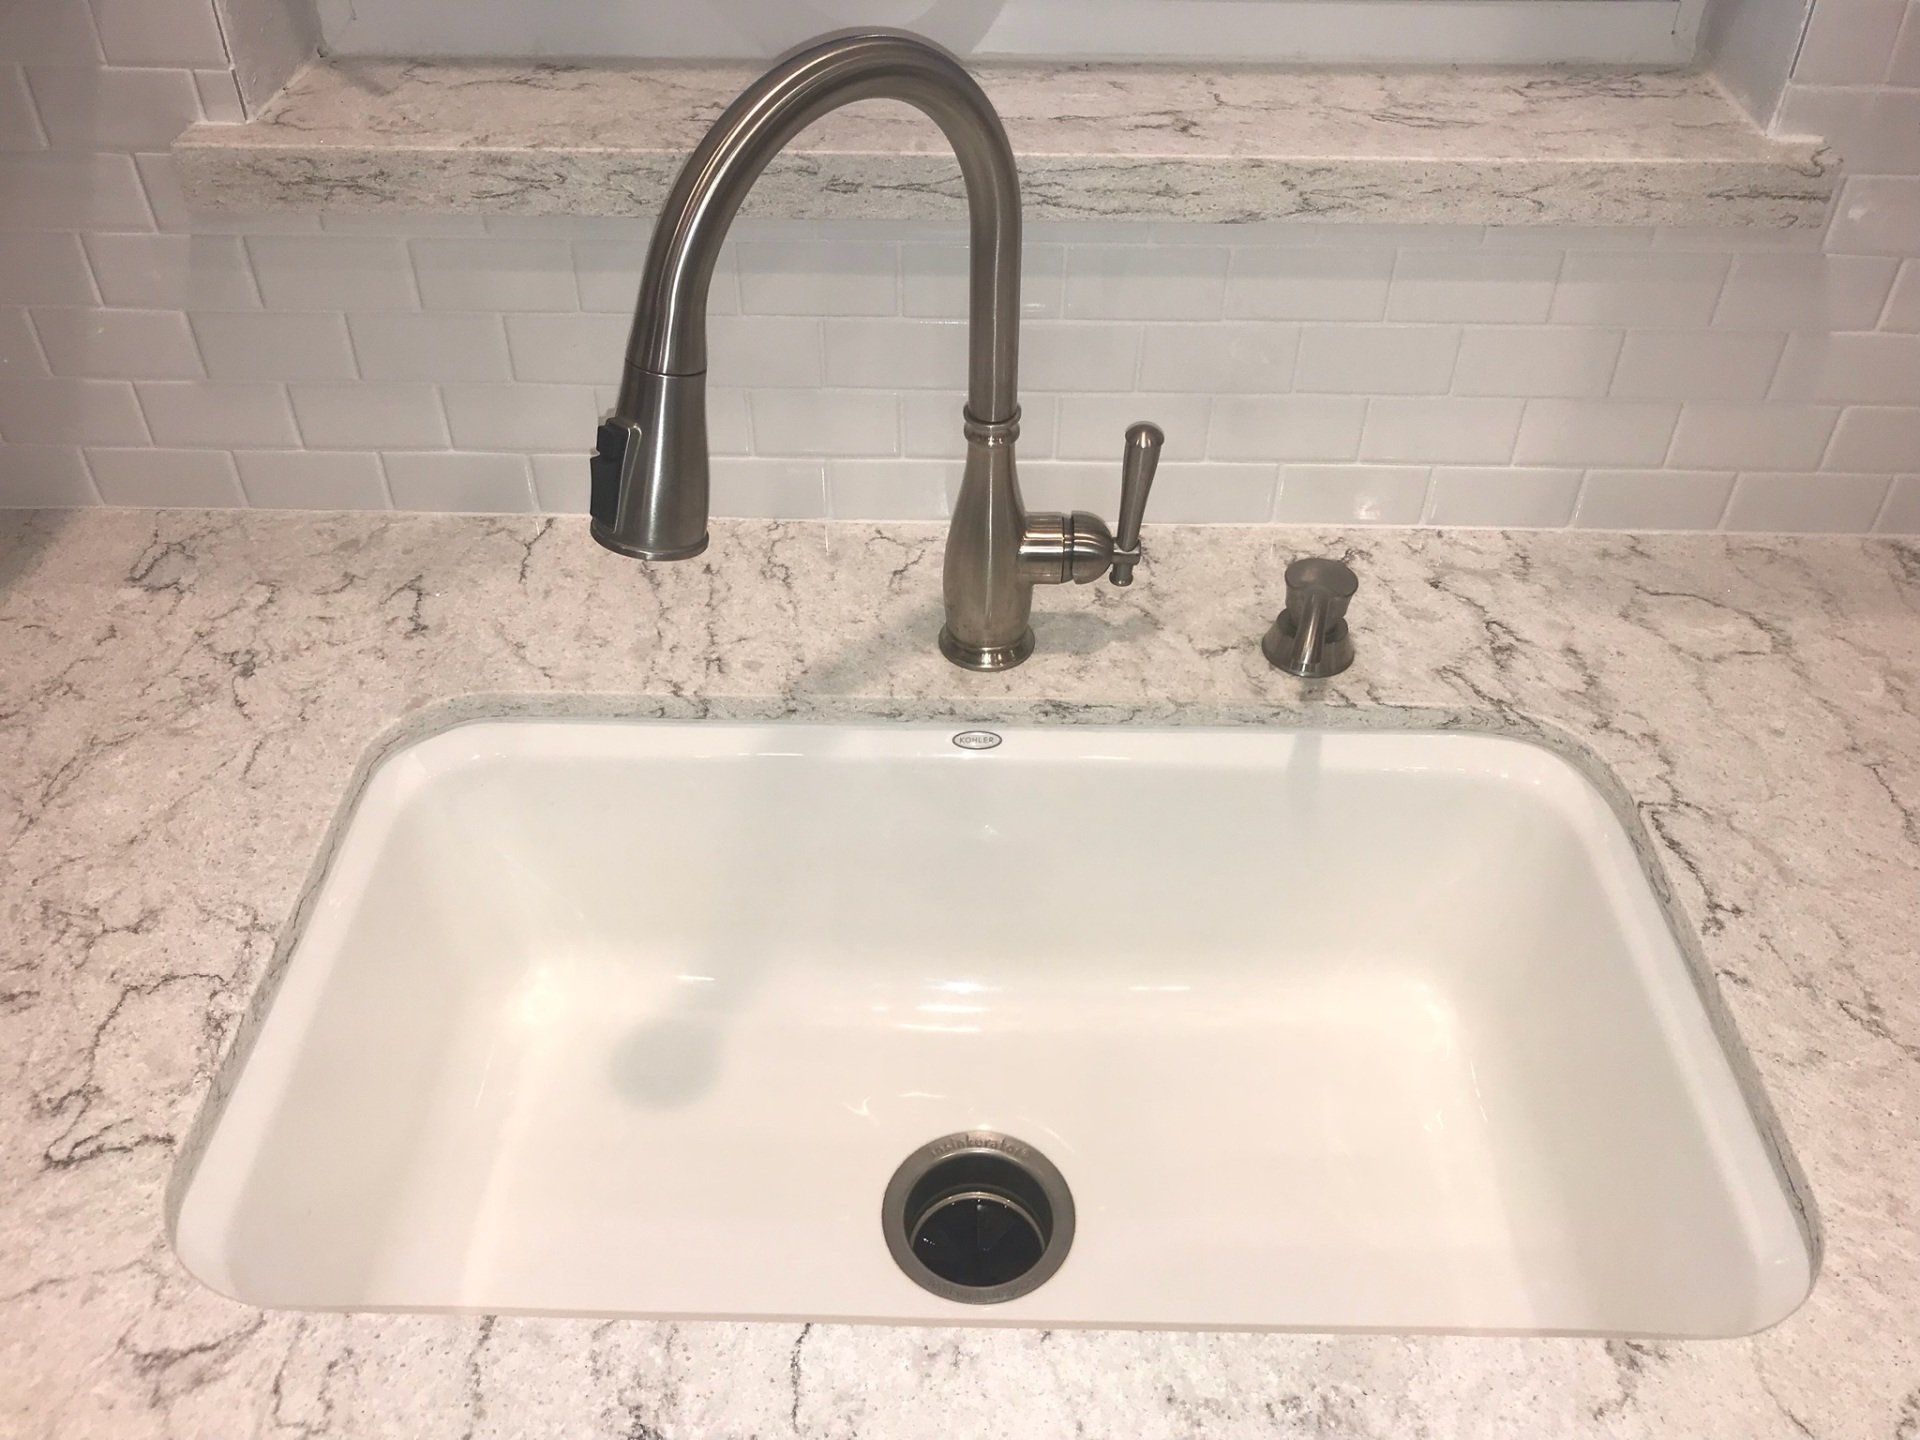 Sink and faucet repair and replacement by plumber near me in League City, Dickinson and surrounding area.